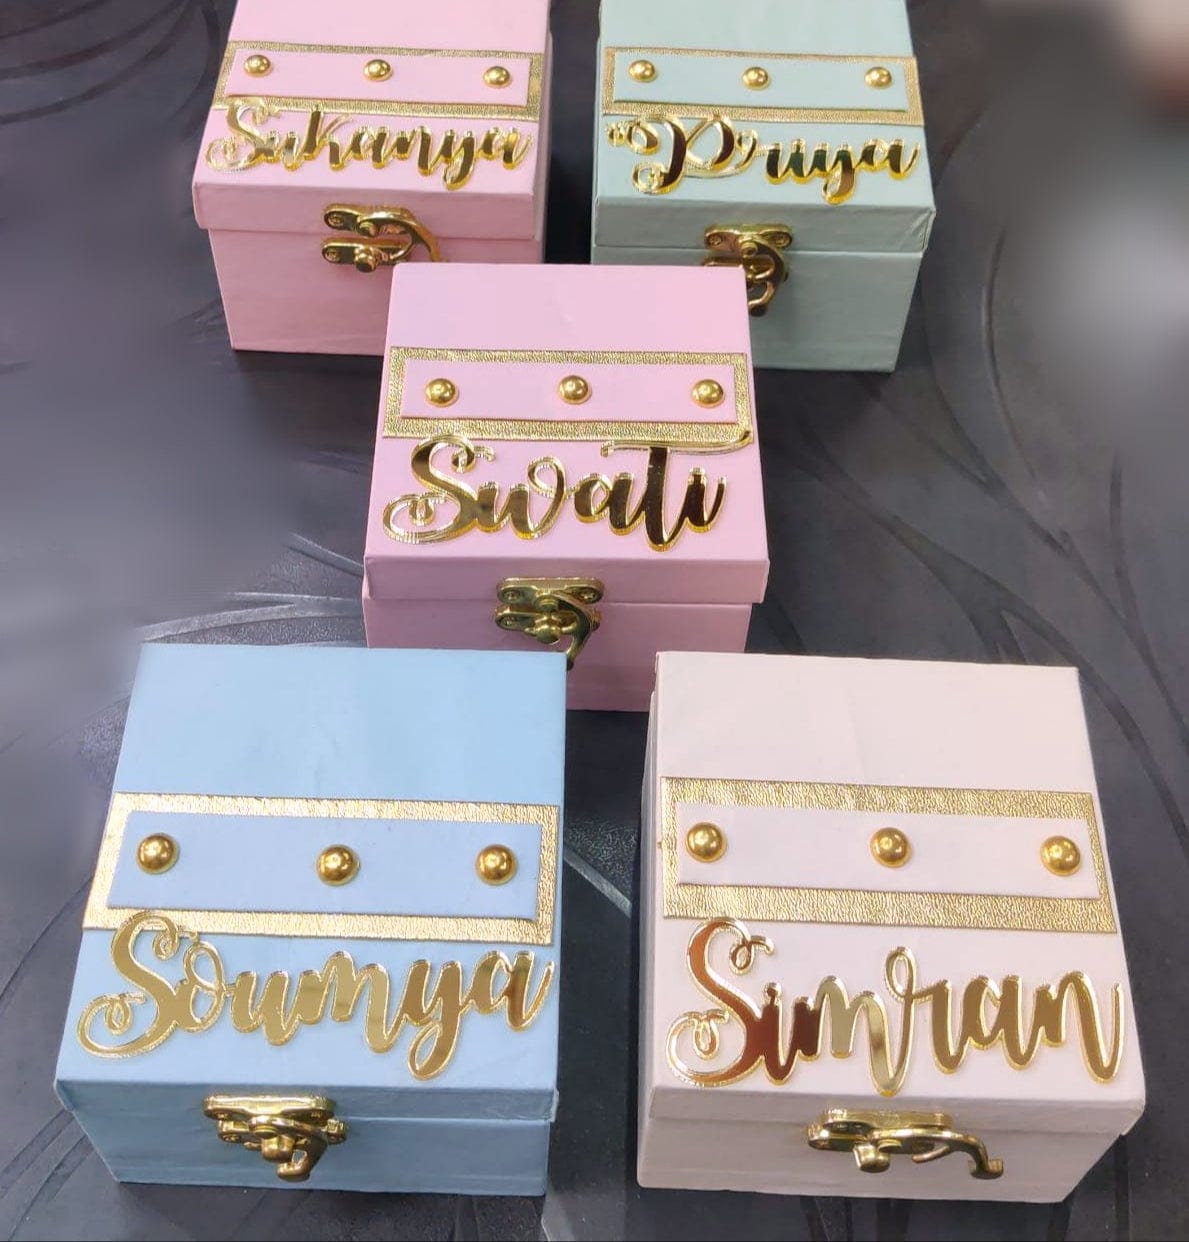 Moq : 5 leatherite boxes LAMANSH® ( 4*4 inch ) Customized Leather mini trunk boxes for gifting 🎁 / small leatherite lock boxes for wedding favors with Name plates